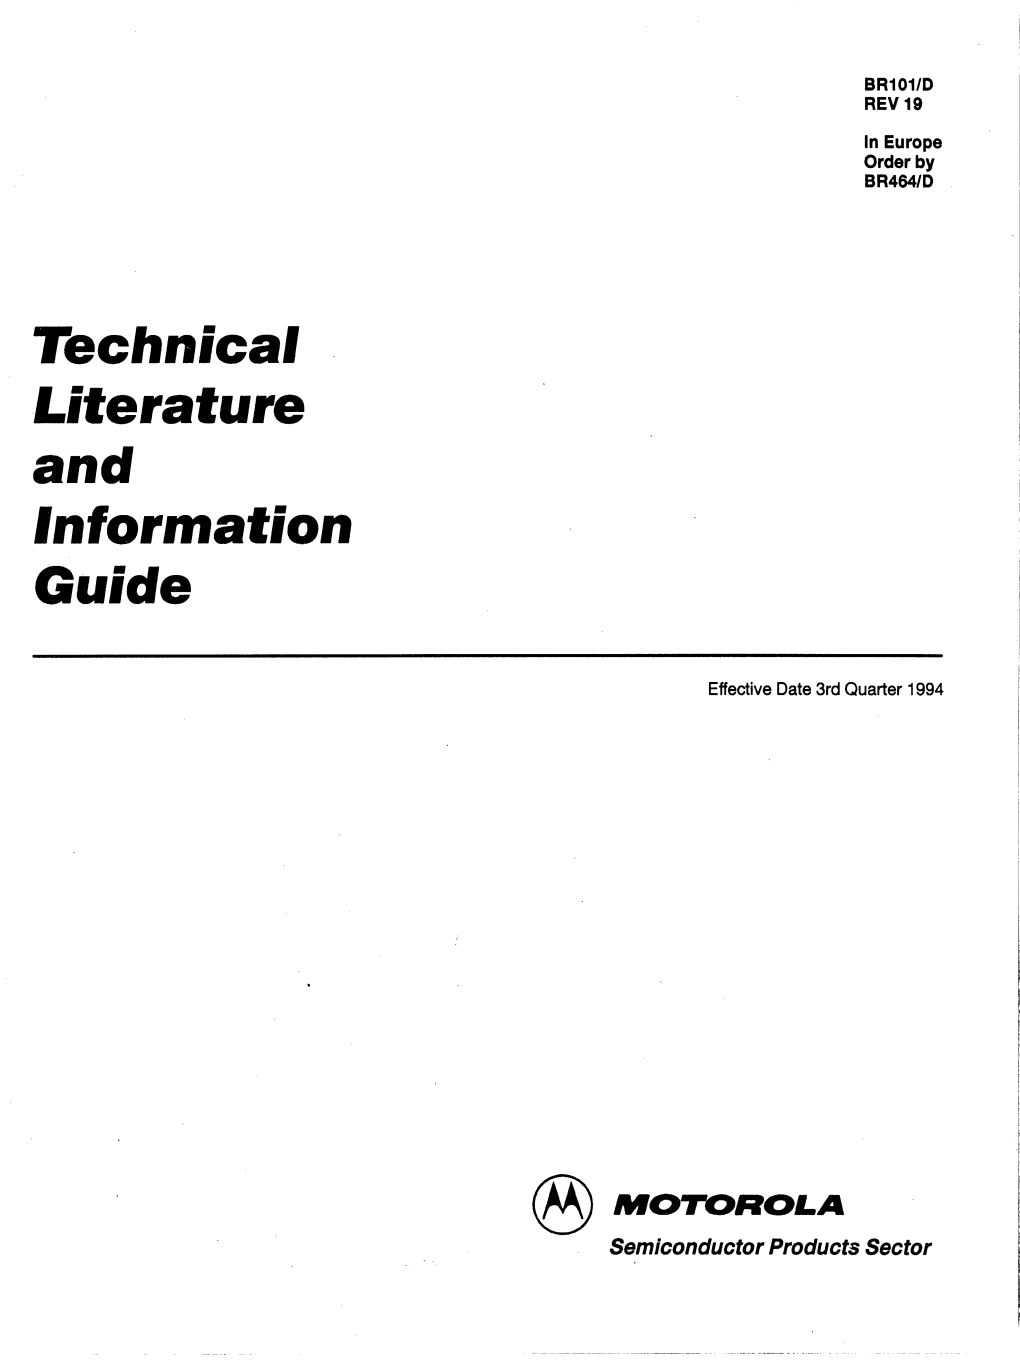 Technical I.Iterature and Information Guide